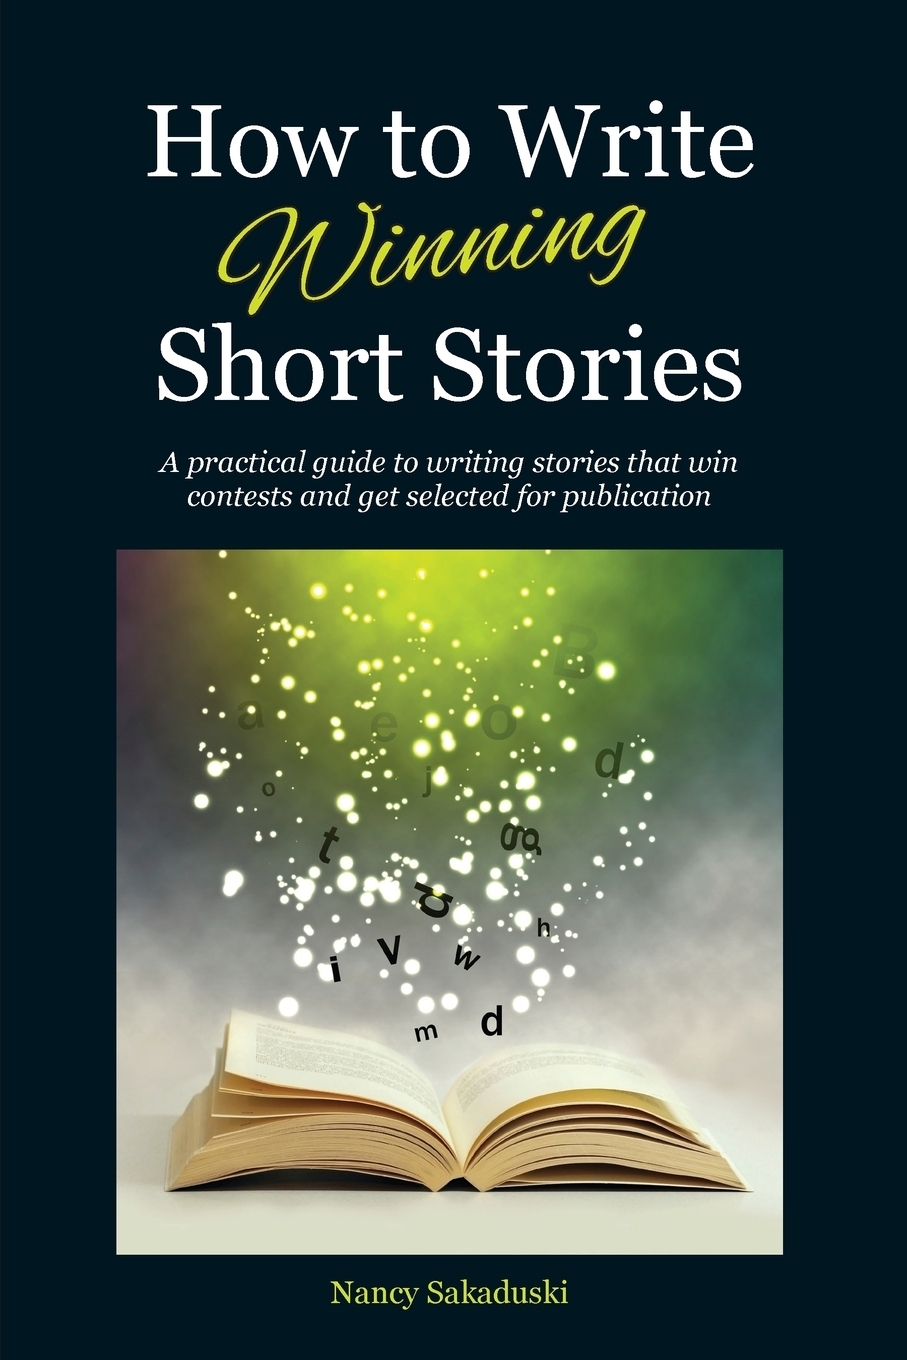 How to Write Winning Short Stories. A practical guide to writing stories that win contests and get selected for publication